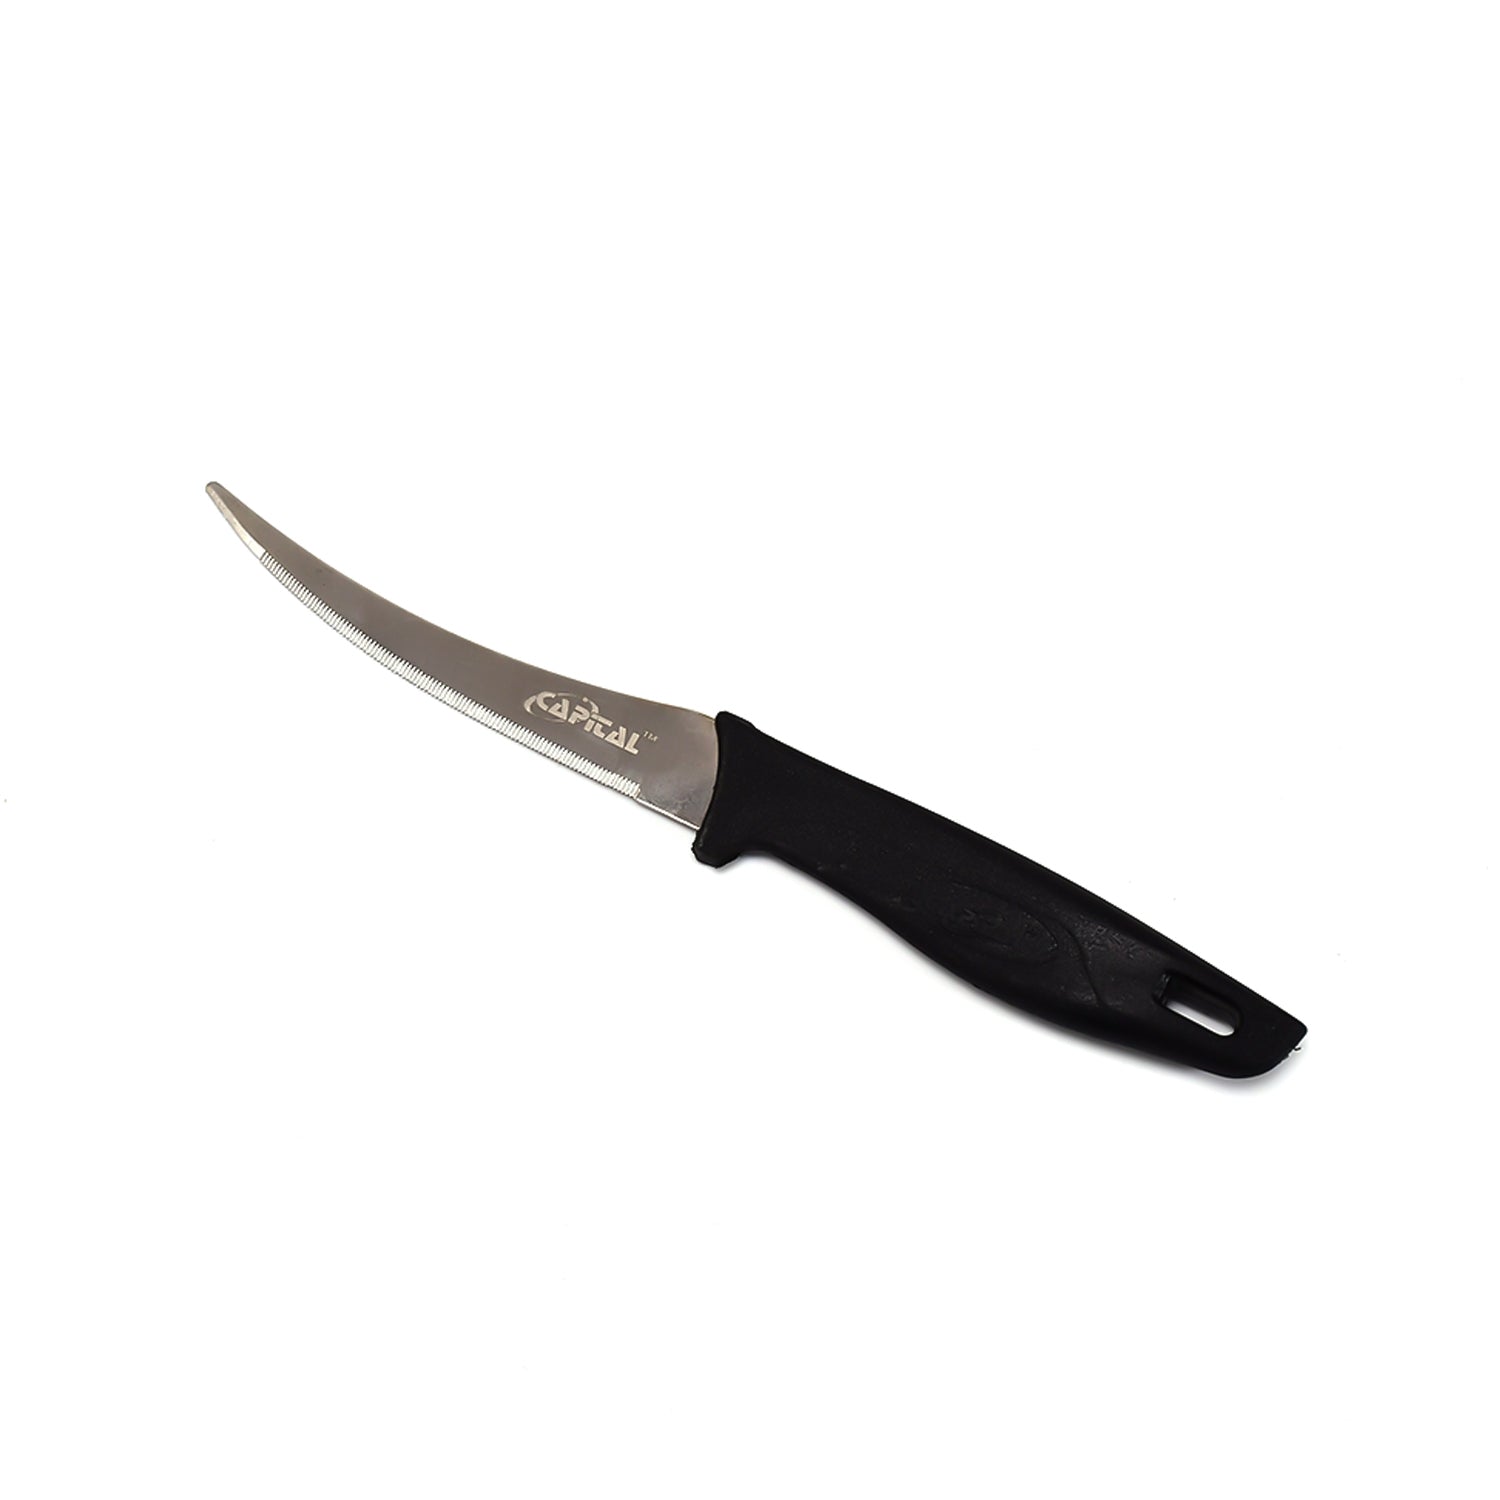 2390 Stainless Steel knife and Kitchen Knife with Black Grip Handle (21 Cm) DeoDap